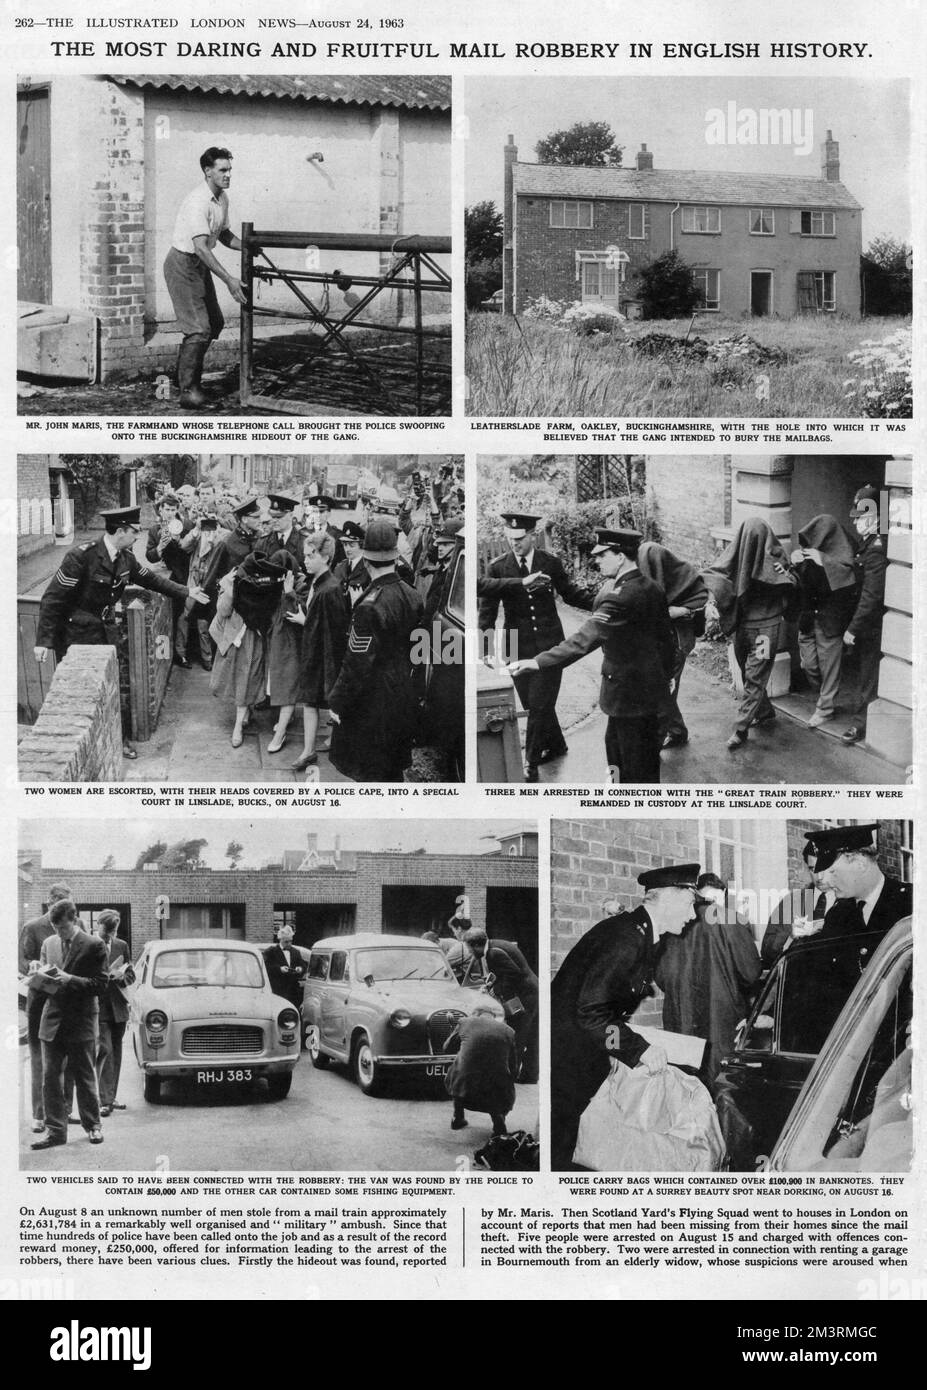 &quot;The most daring and fruitful mail robbery in English History&quot;: a page from The Illustrated London News, detailing the aftermath of the Great Train Robbery of 8th August 1963. Leatherslade Farm is pictured, as well as the arrest of suspects by the police.     Date: August 1963 Stock Photo